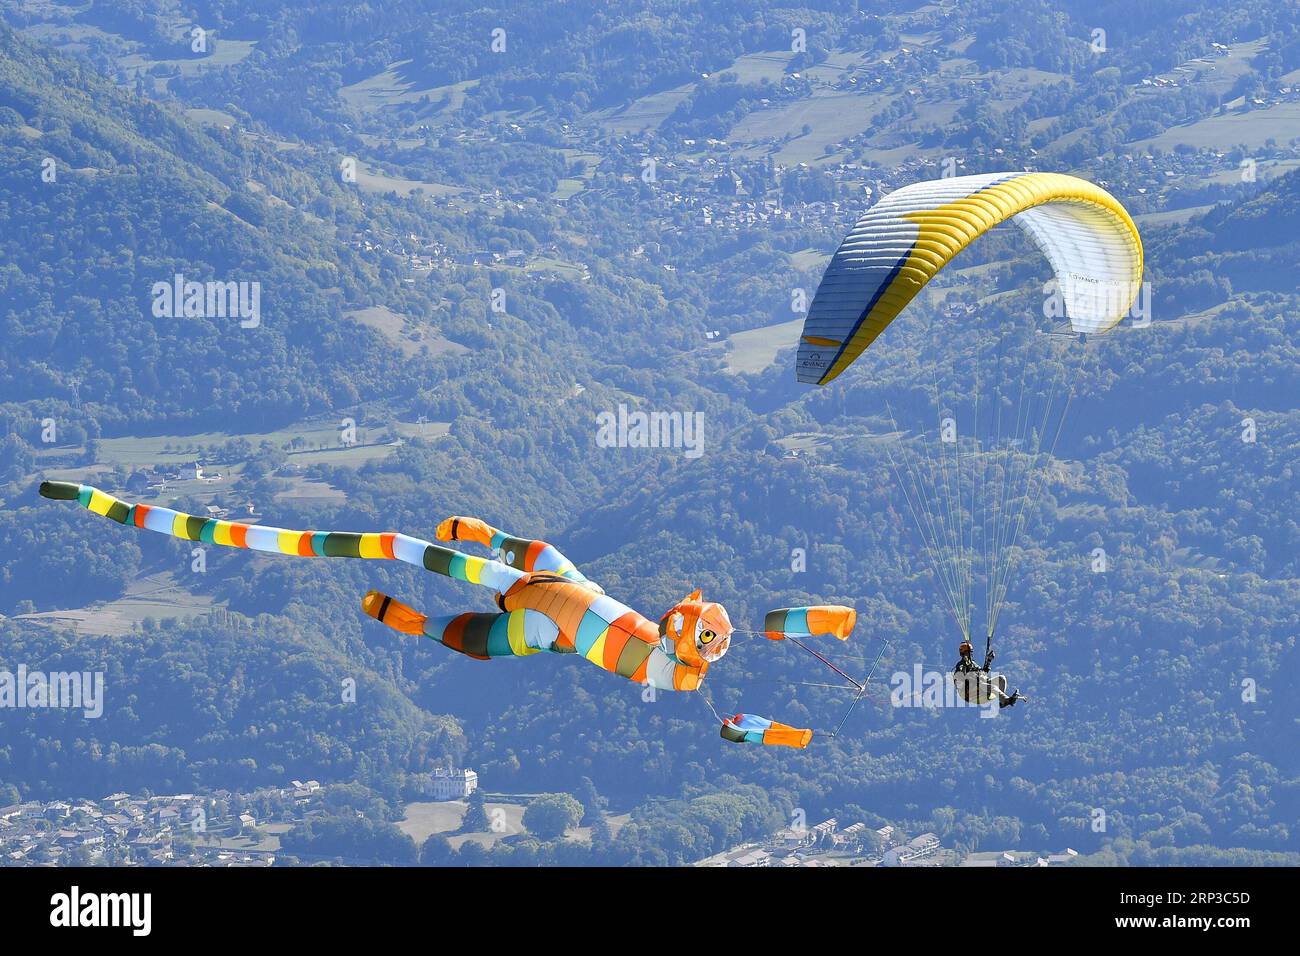 (180930) -- BEIJING, Sept. 30, 2018 -- A pilot practices a disguised flight in Saint-Hilaire, France on Sept. 23, 2018. The four-day air sports festival, Coupe Icare, concluded on Sunday. On its 45th edition, the Coupe Icare this year attracted about 700 accredited pilots and over 90,000 spectators. ) XINHUA PHOTO WEEKLY CHOICES ChenxYichen PUBLICATIONxNOTxINxCHN Stock Photo